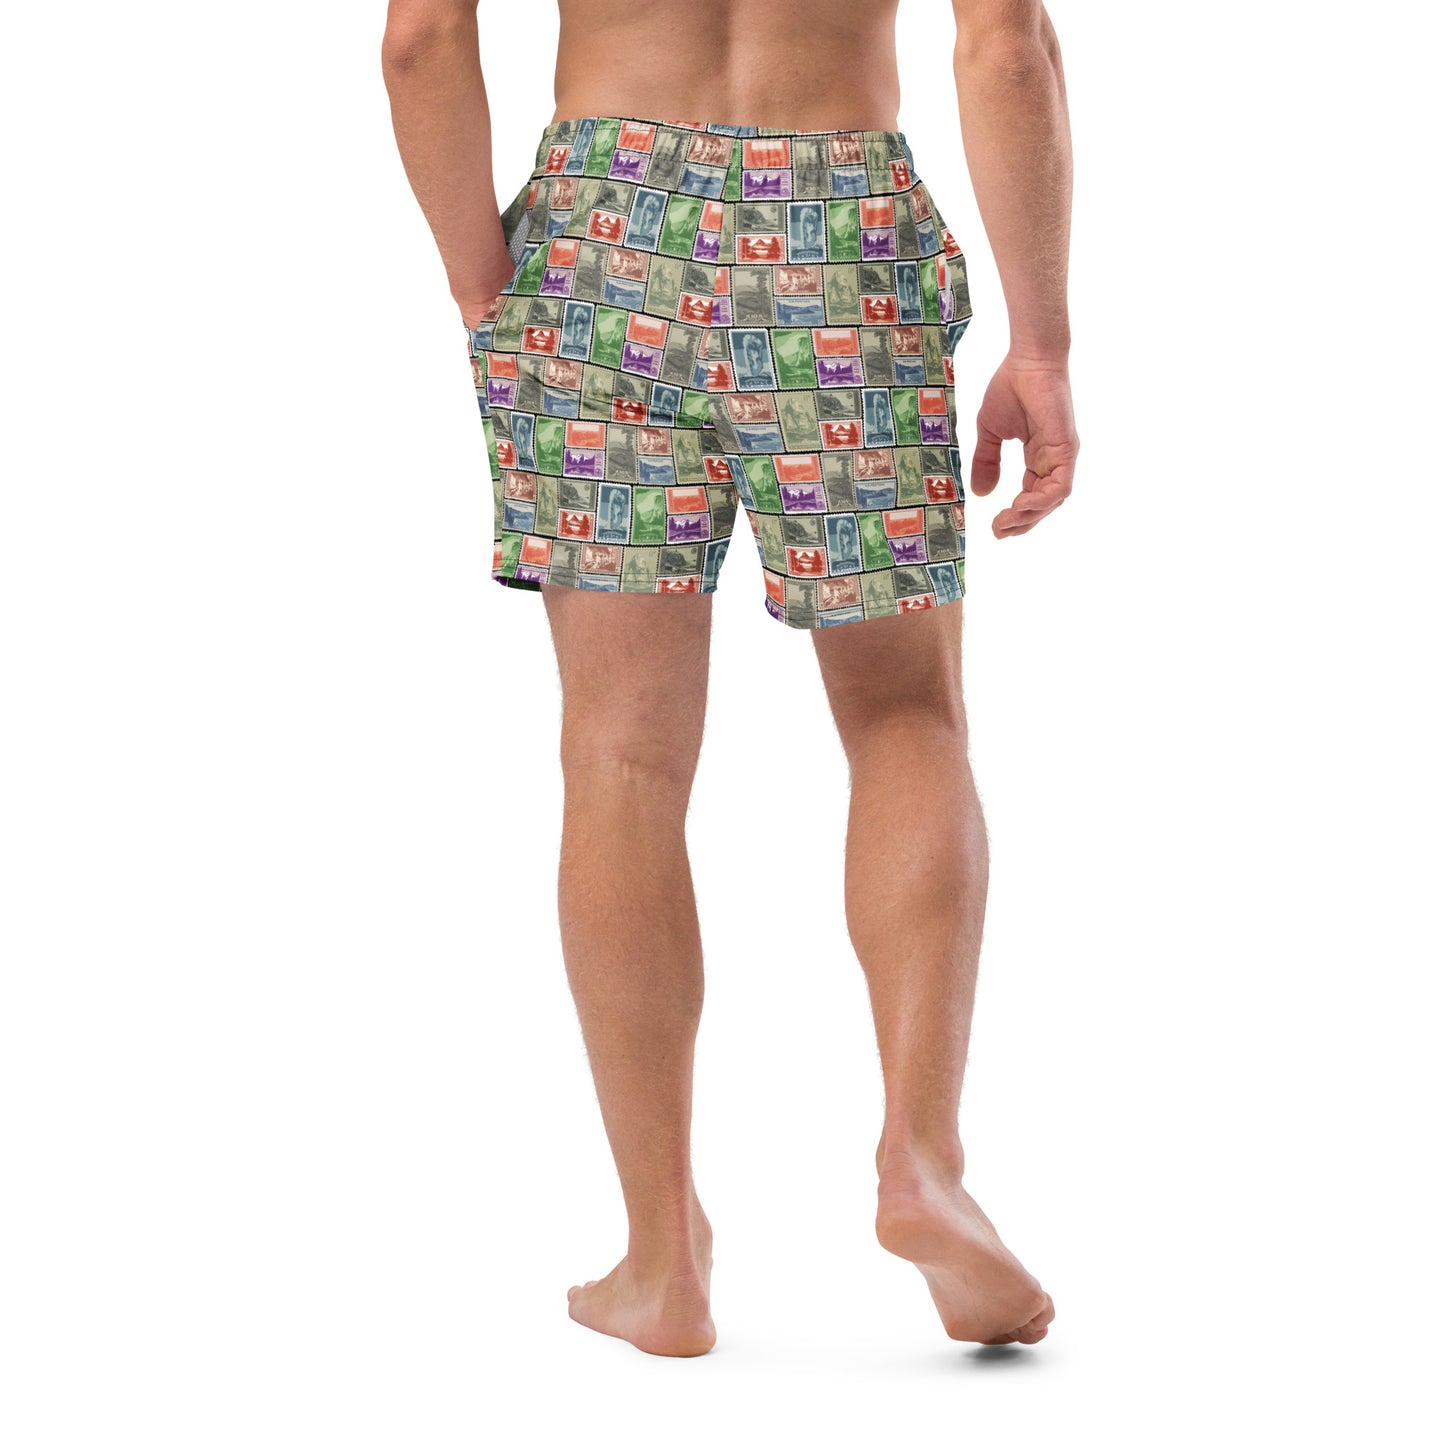 National Park Postage Stamp Recycled Polyester Swim Trunks